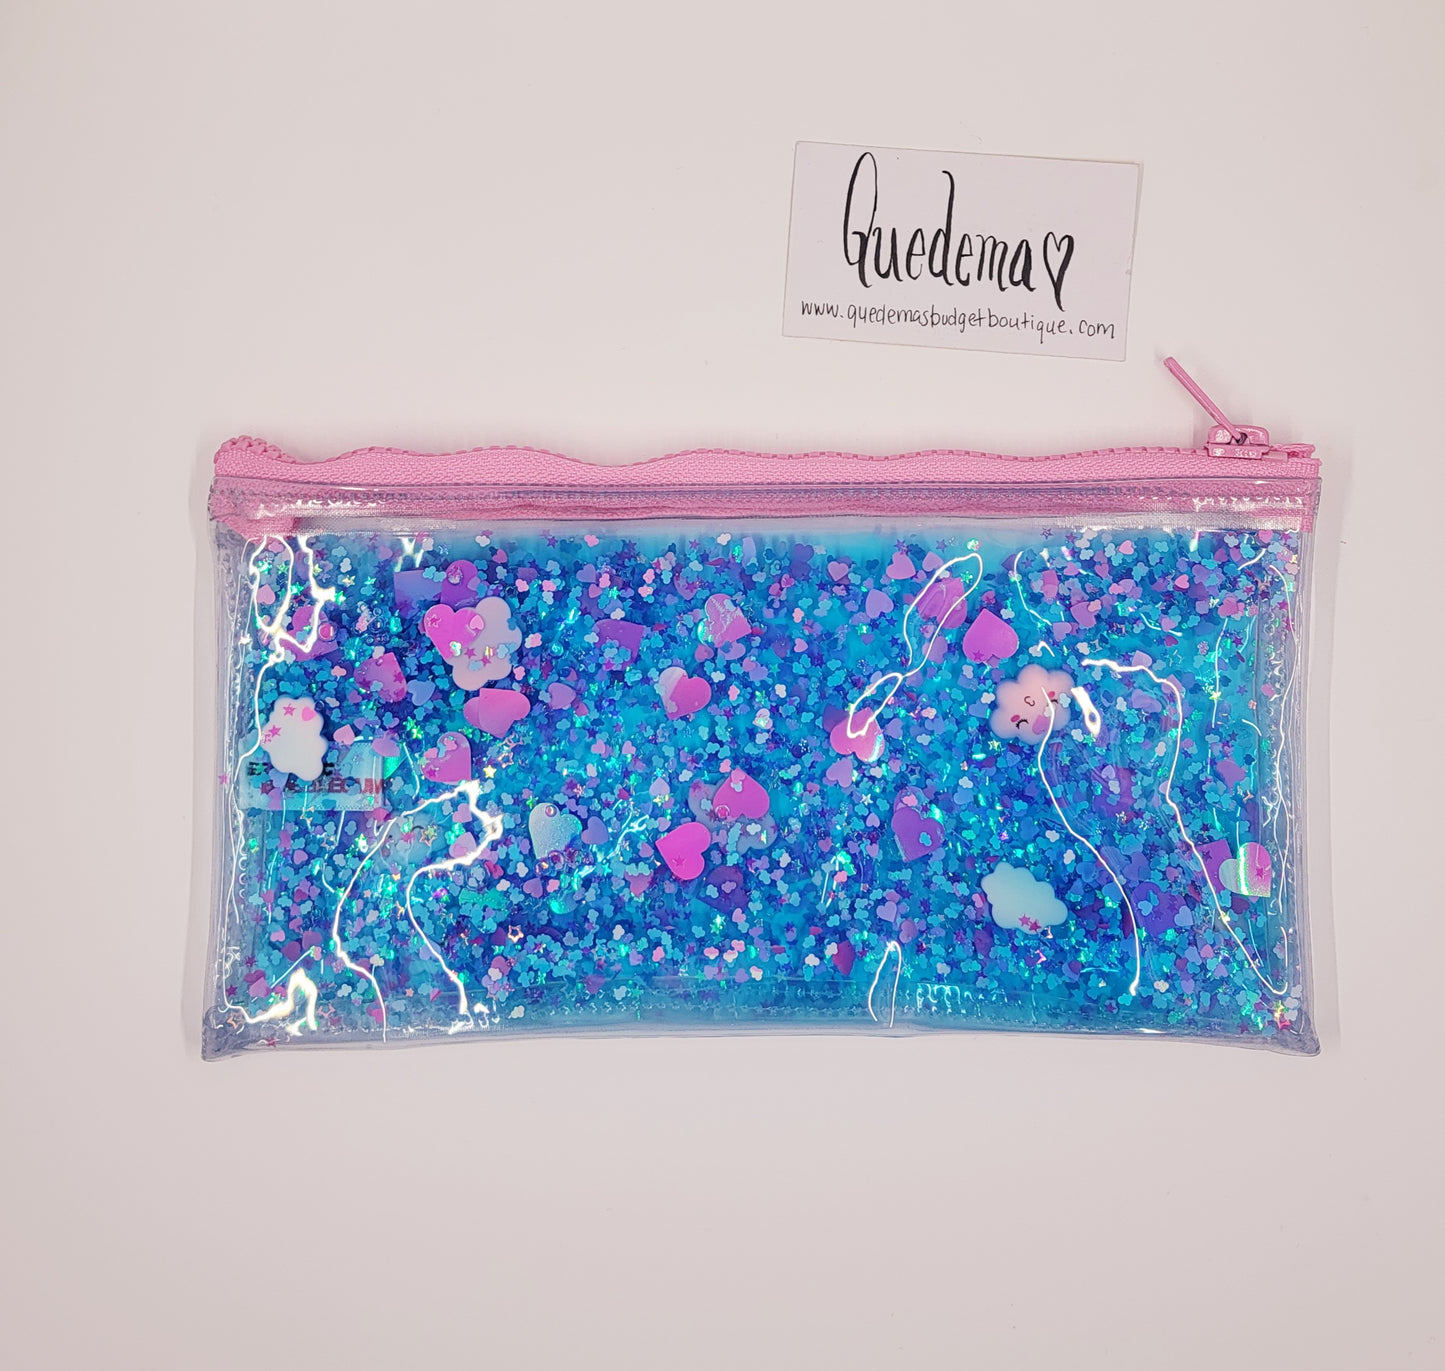 Liquid & Glitter! Pencil Pouch! Bank Bag! 2 Options Available!!